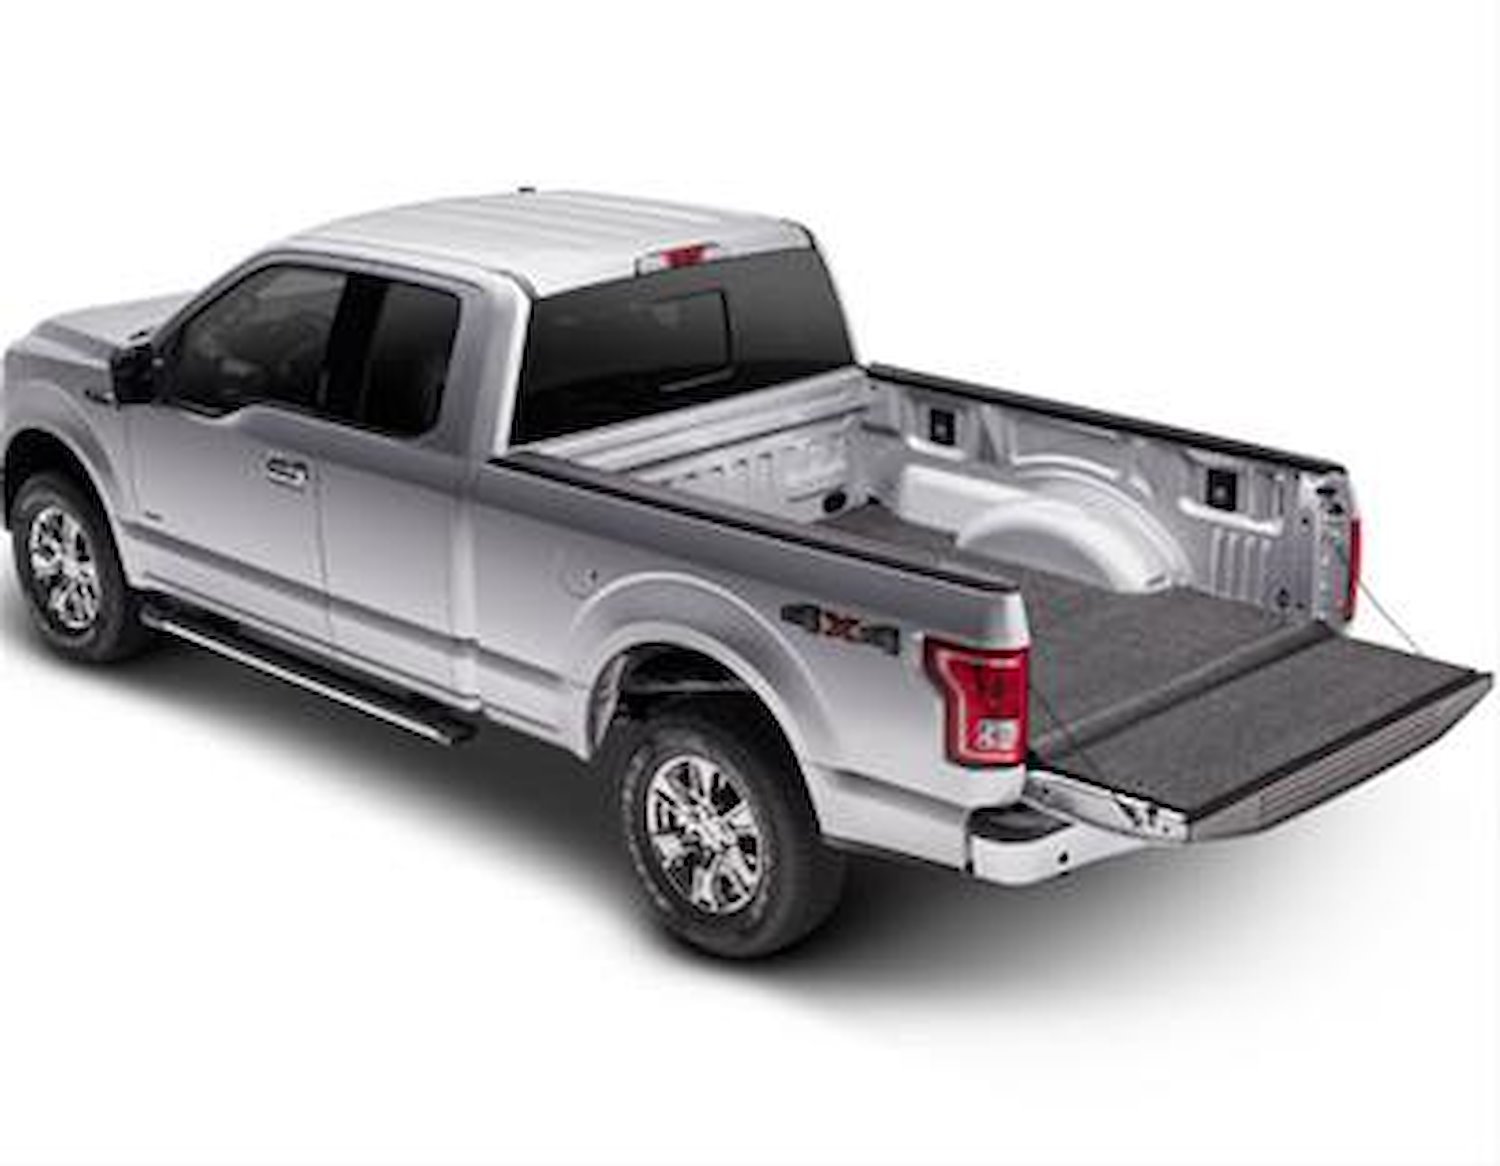 XLTBMQ15LBS XLT BEDMAT FOR SPRAY-IN OR NO BED LINER 15+ FORD F-150 8'2" BED